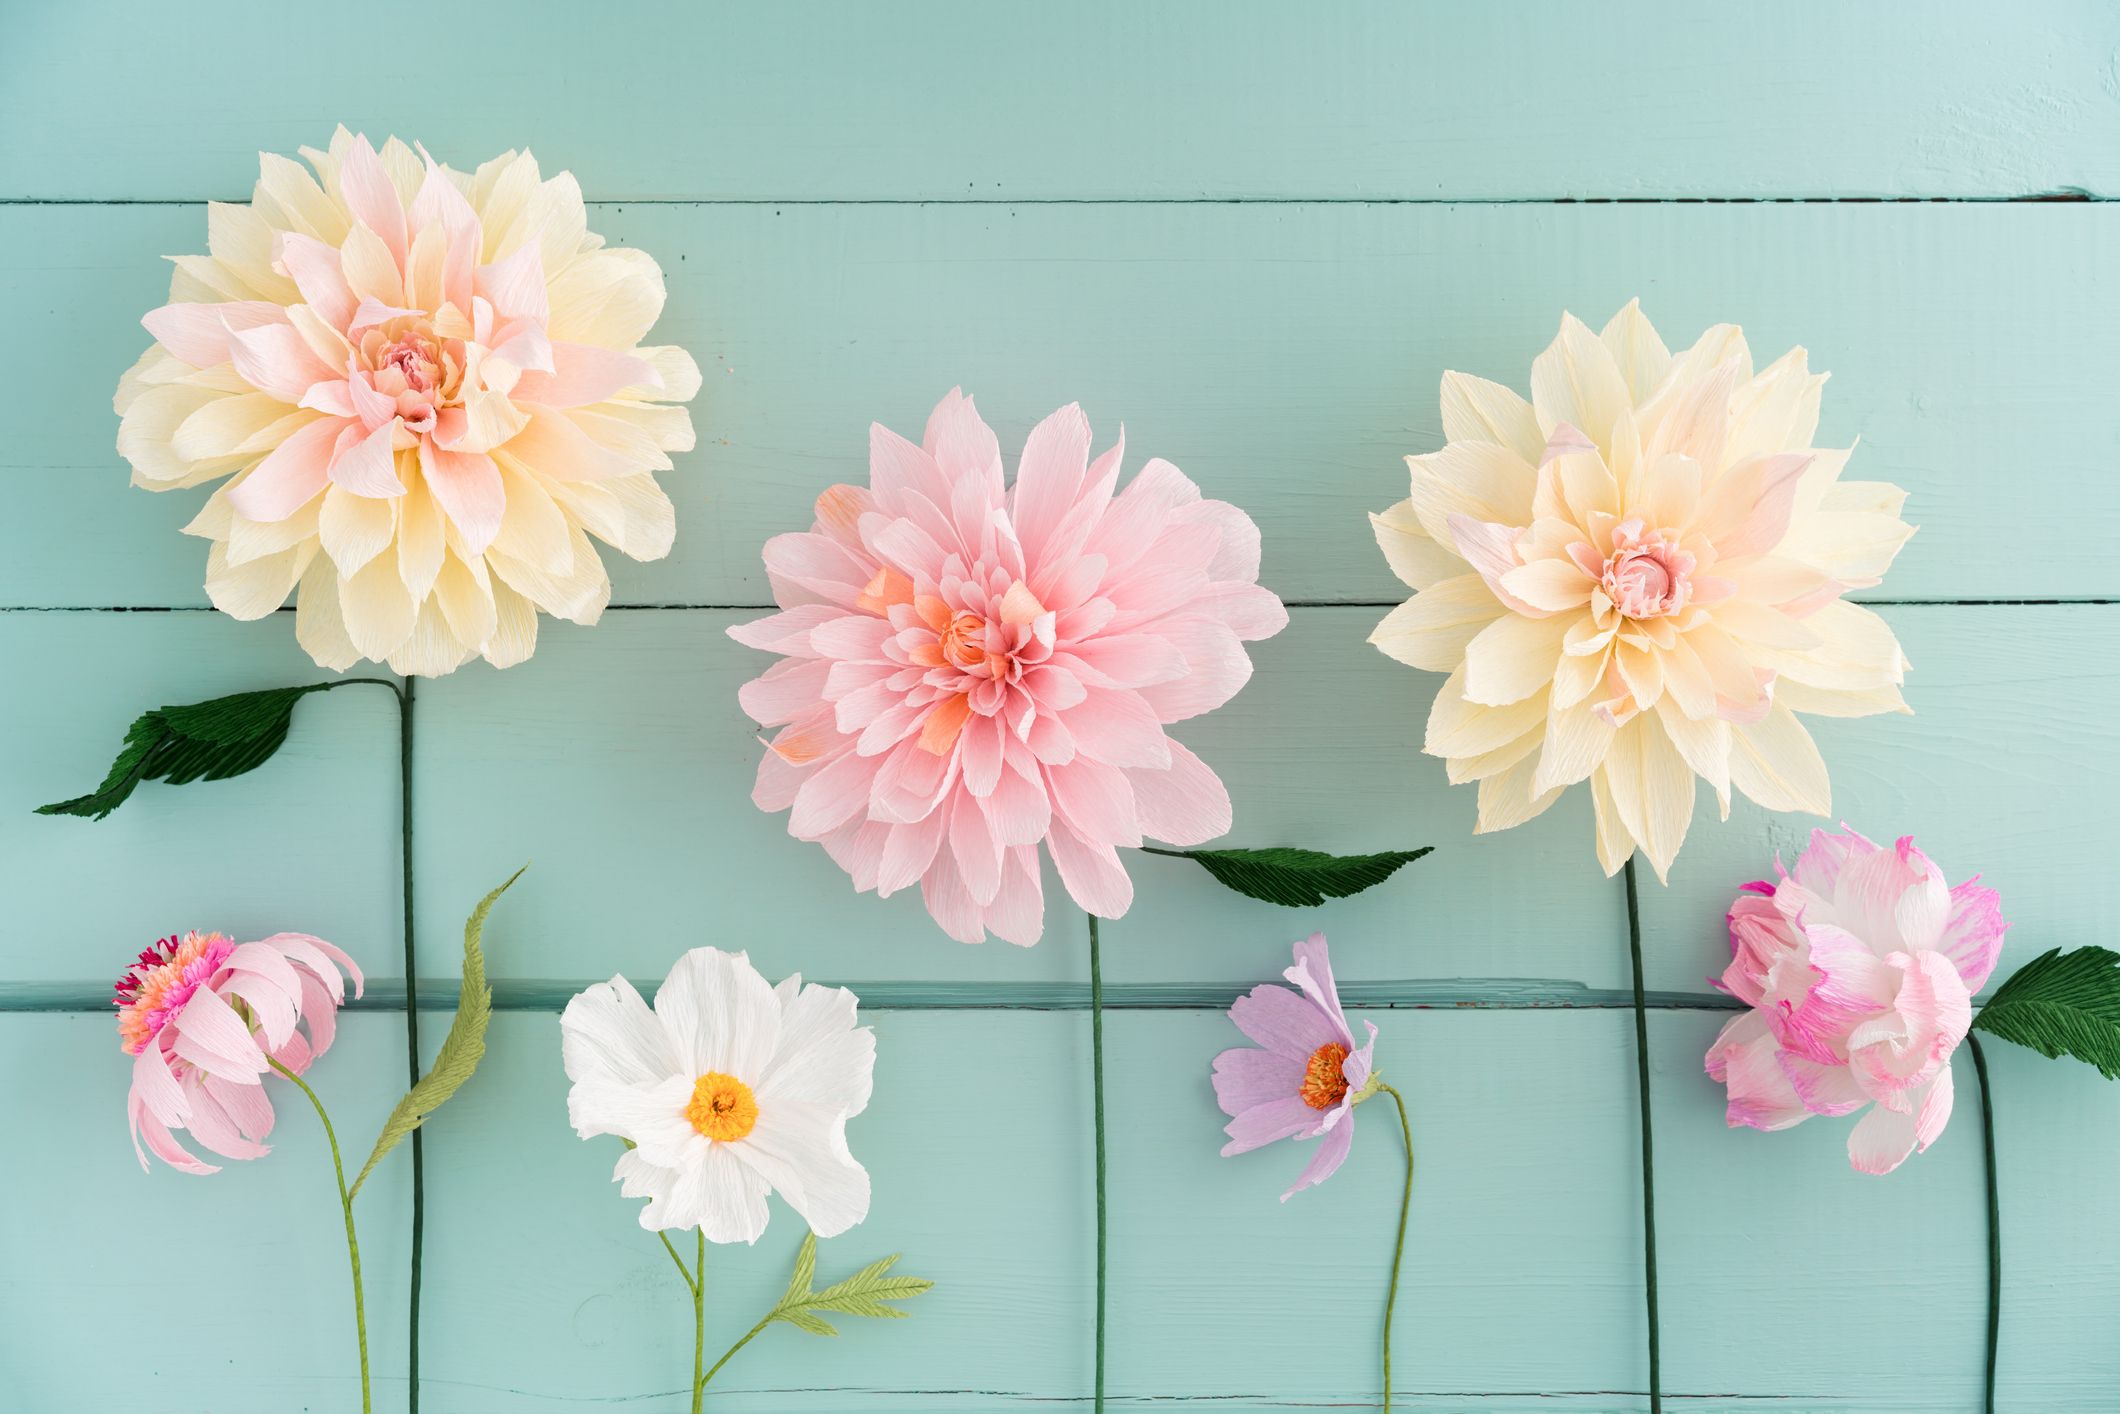 How to make Paper Flowers?